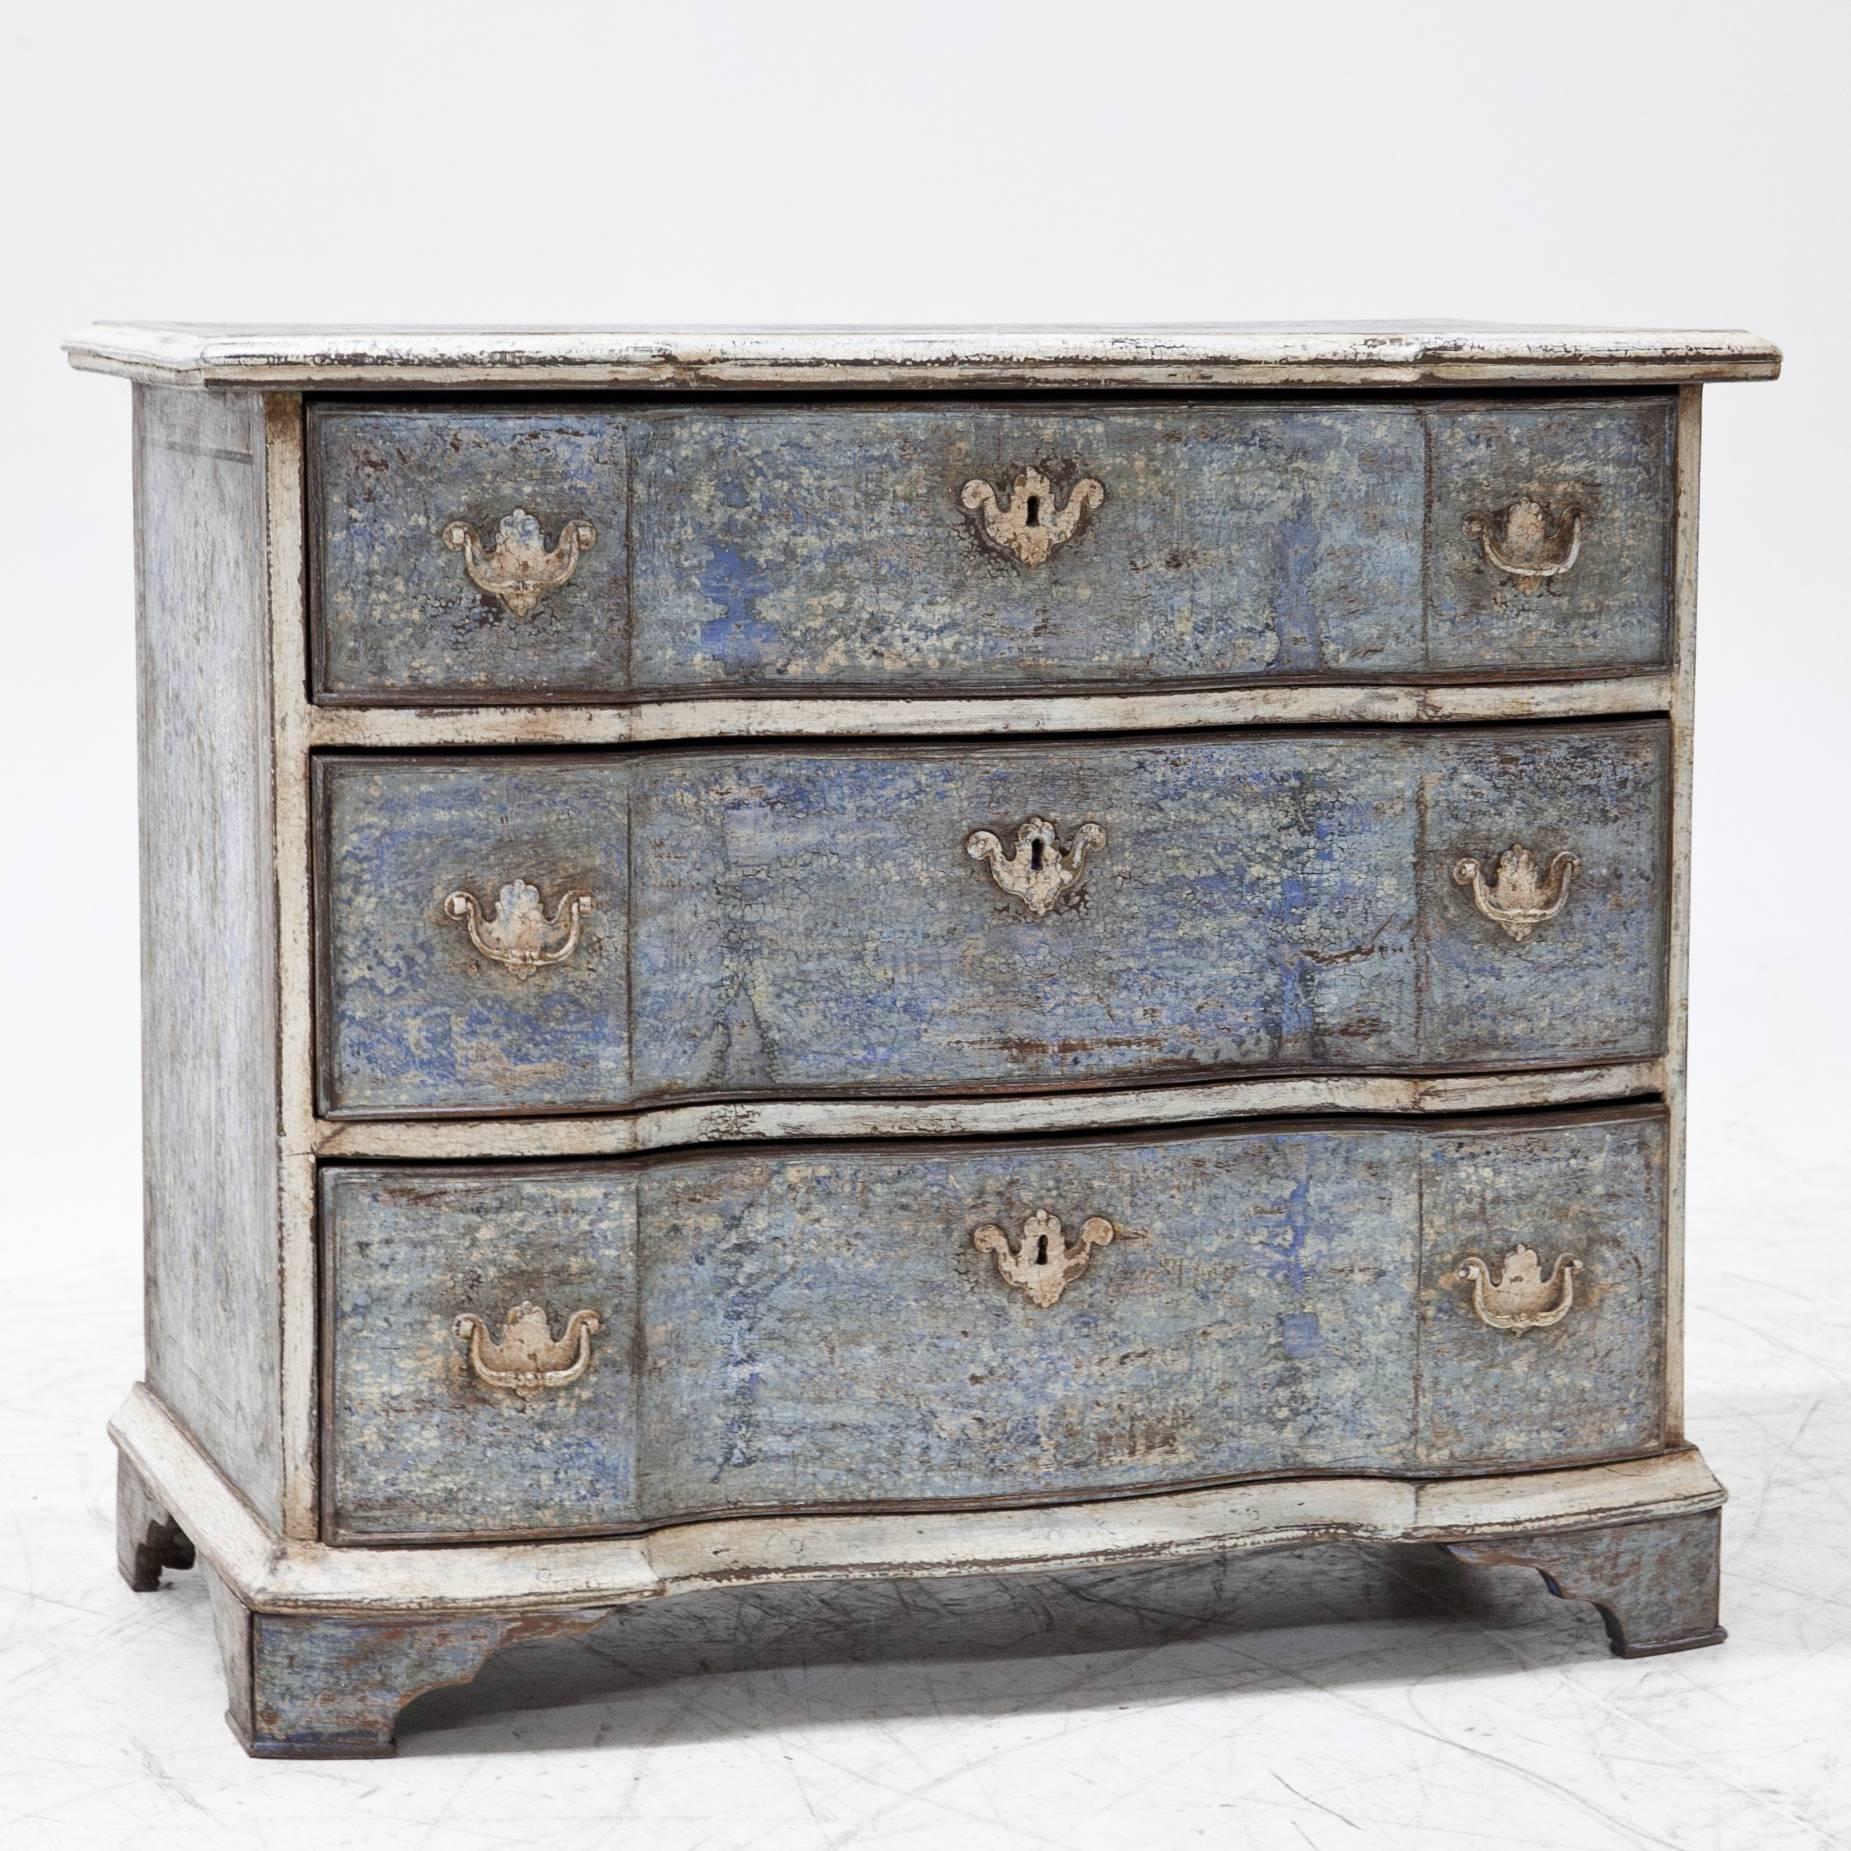 European Baroque Chest of Drawers, 18th Century